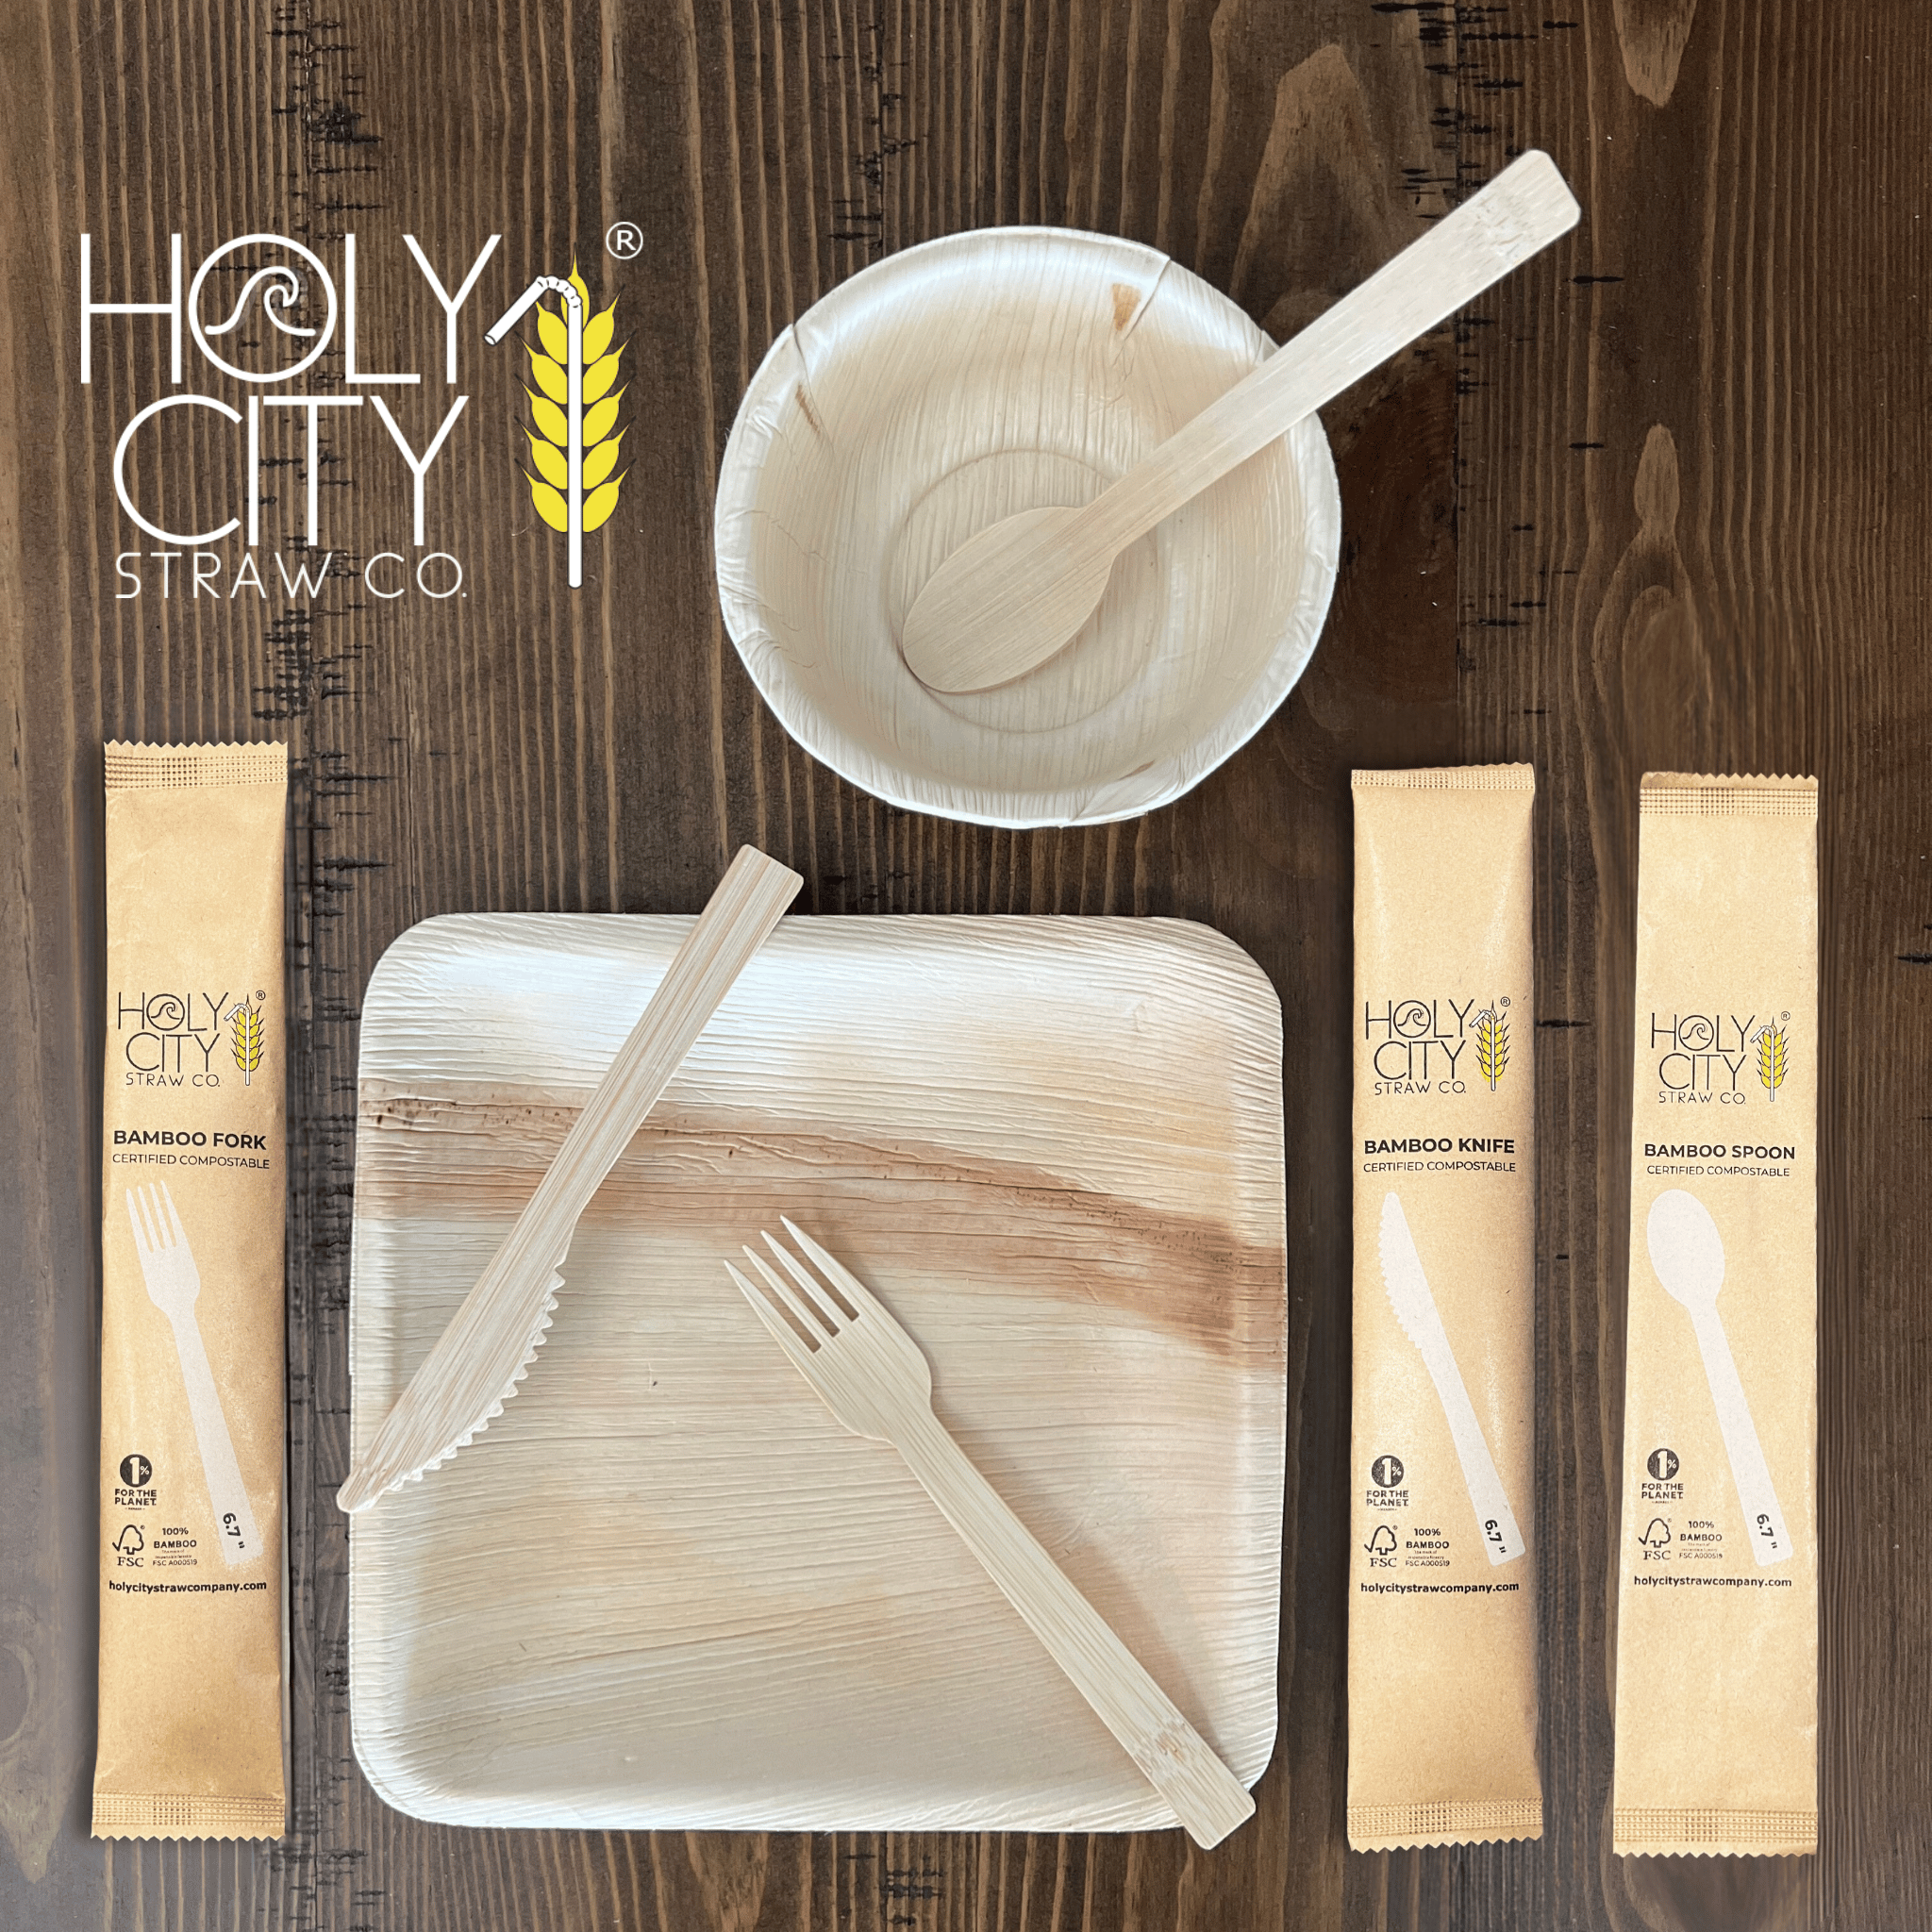 Wrapped bamboo cutlery set by Holy City Straw Co. featuring eco-friendly spoon fork and knife on wooden background